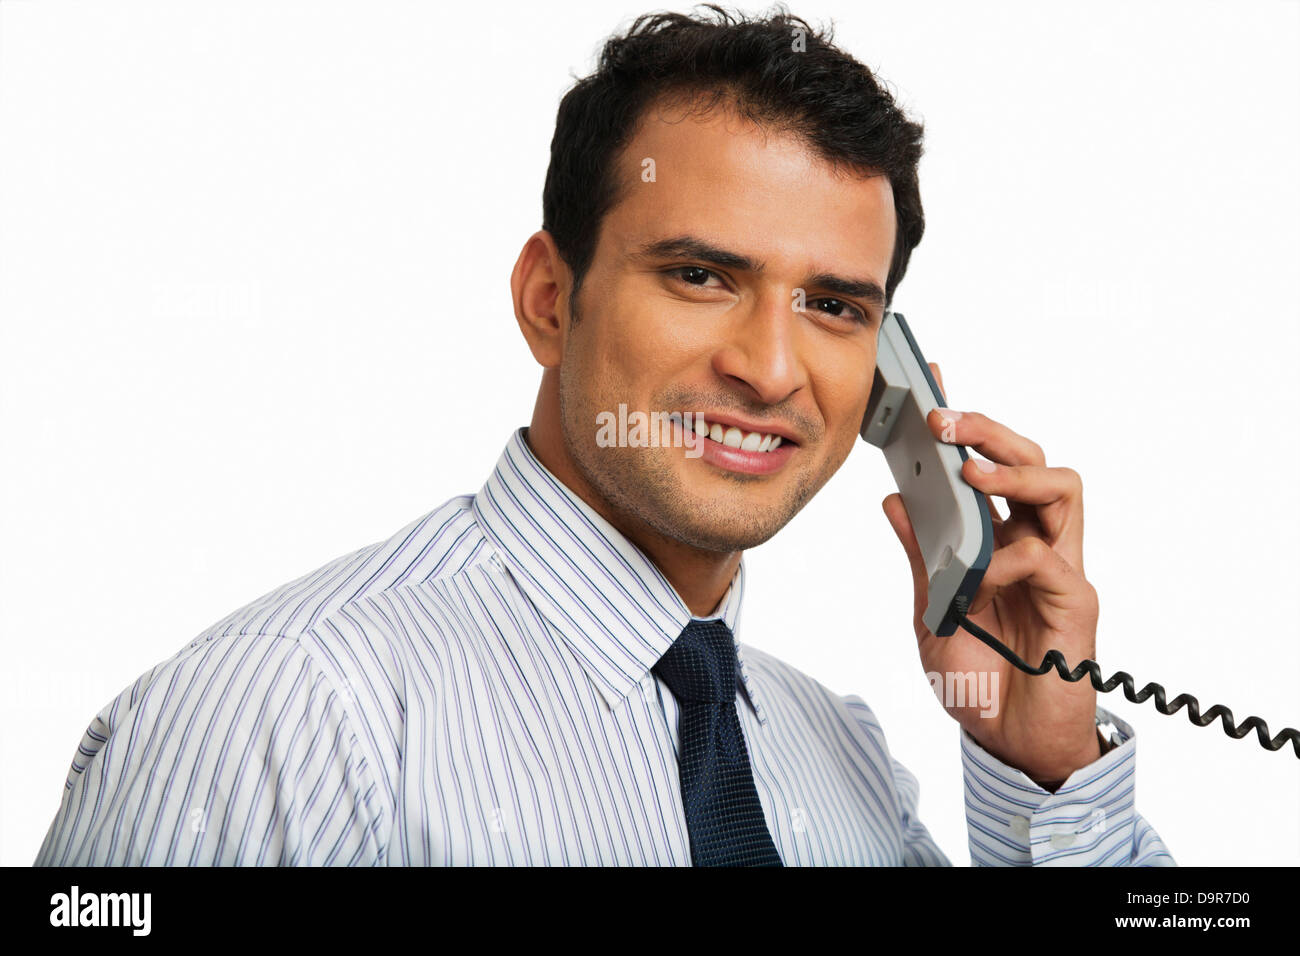 Businessman talking on a landline phone and smiling Stock Photo